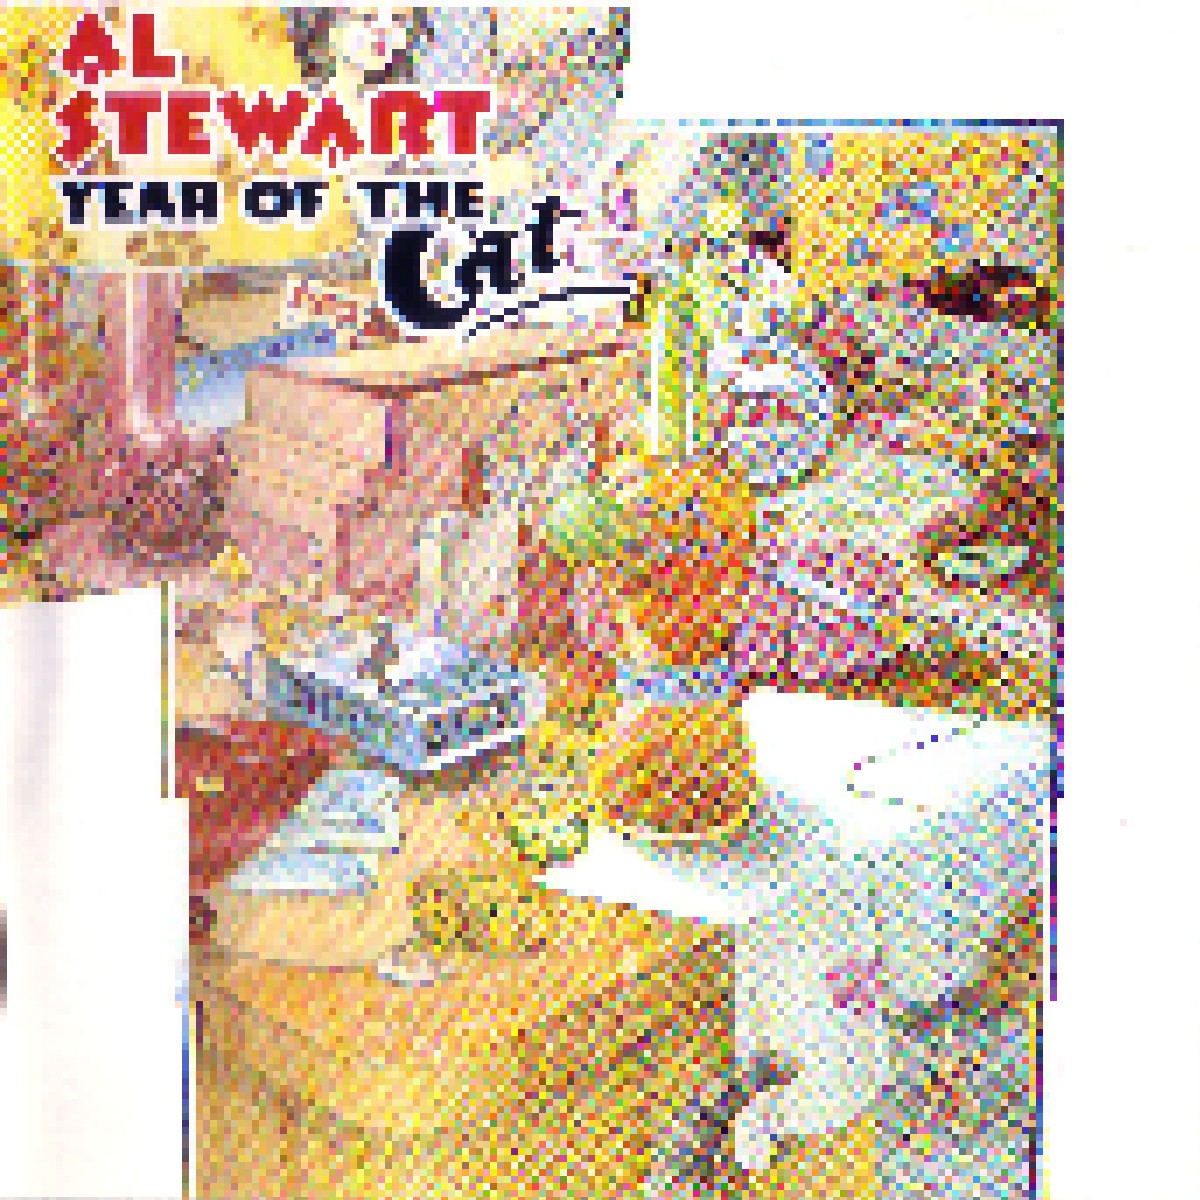 al stewart.the year of the cat full album mp3 free download